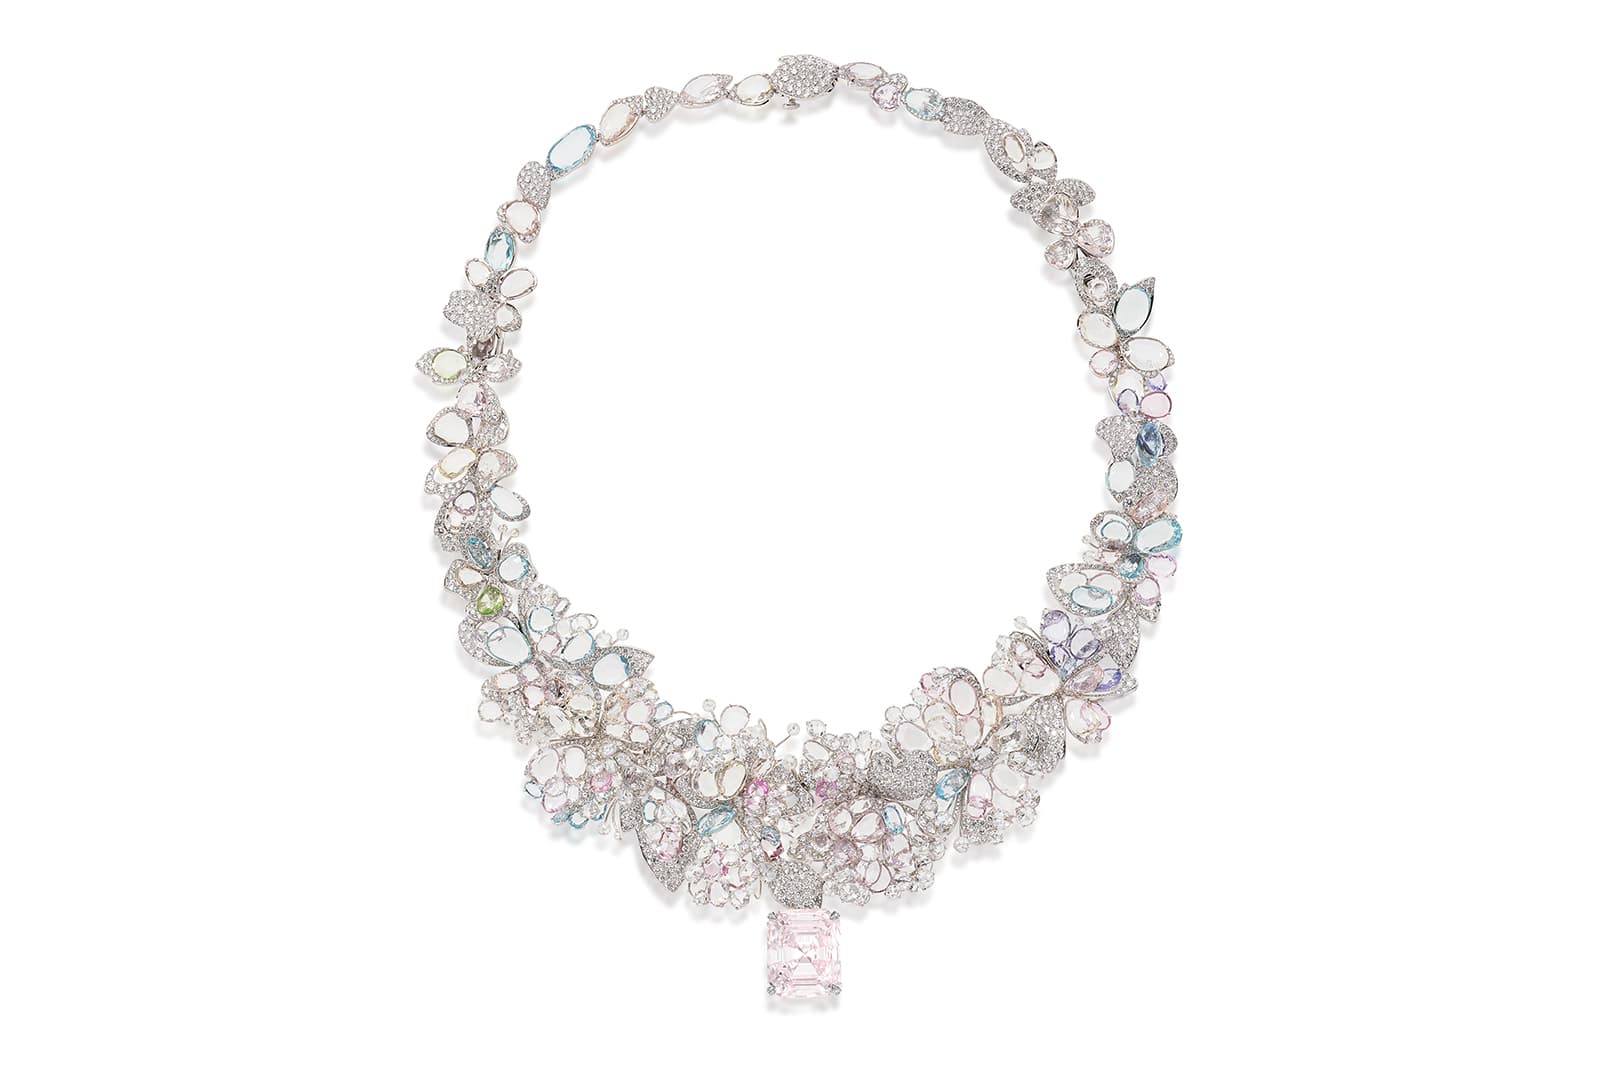 Feng J’s Jardin de Giverny necklace is set with rose-cut sapphires, spinels, tanzanites and tsavorites in pale shades of blue, purple, rose and green alongside a spectacular centrepiece: a rare 19 carat fancy cut light pink diamond